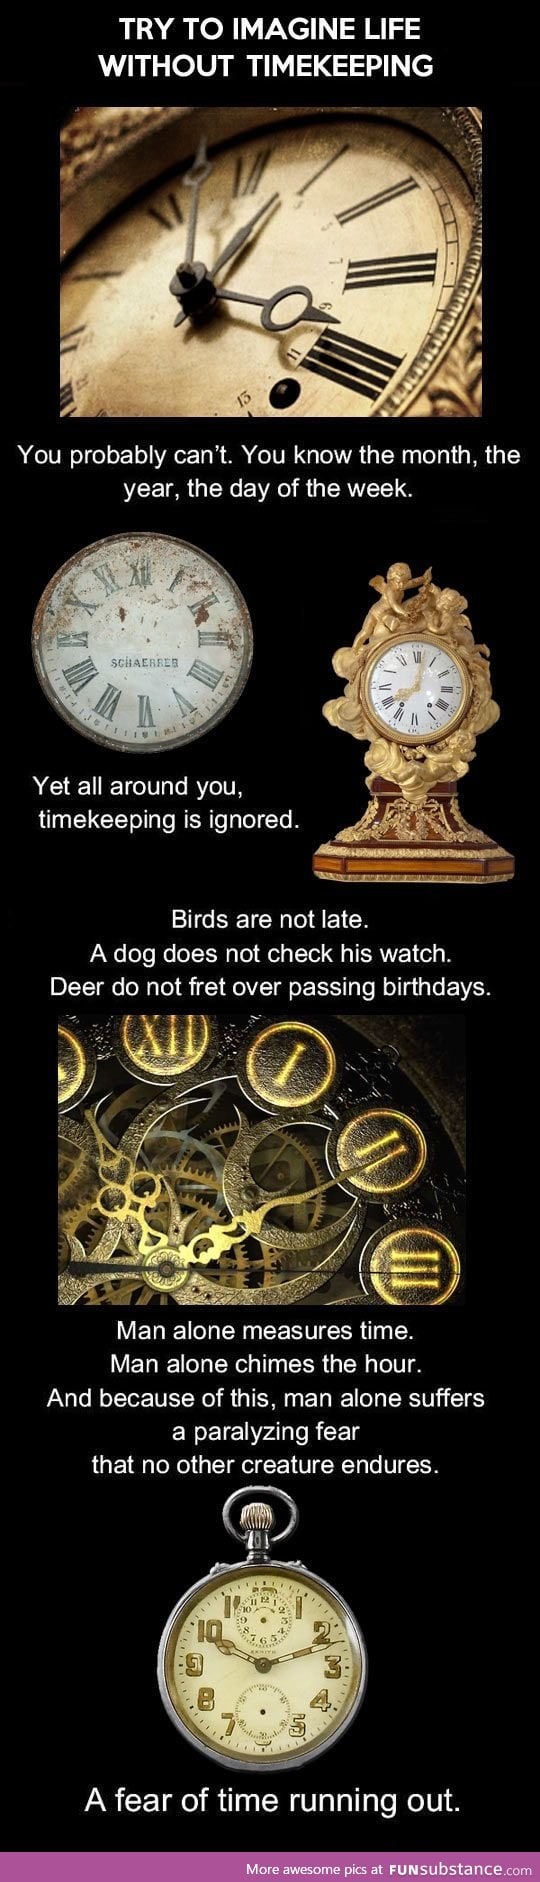 Imagine A World Without Timekeeping...